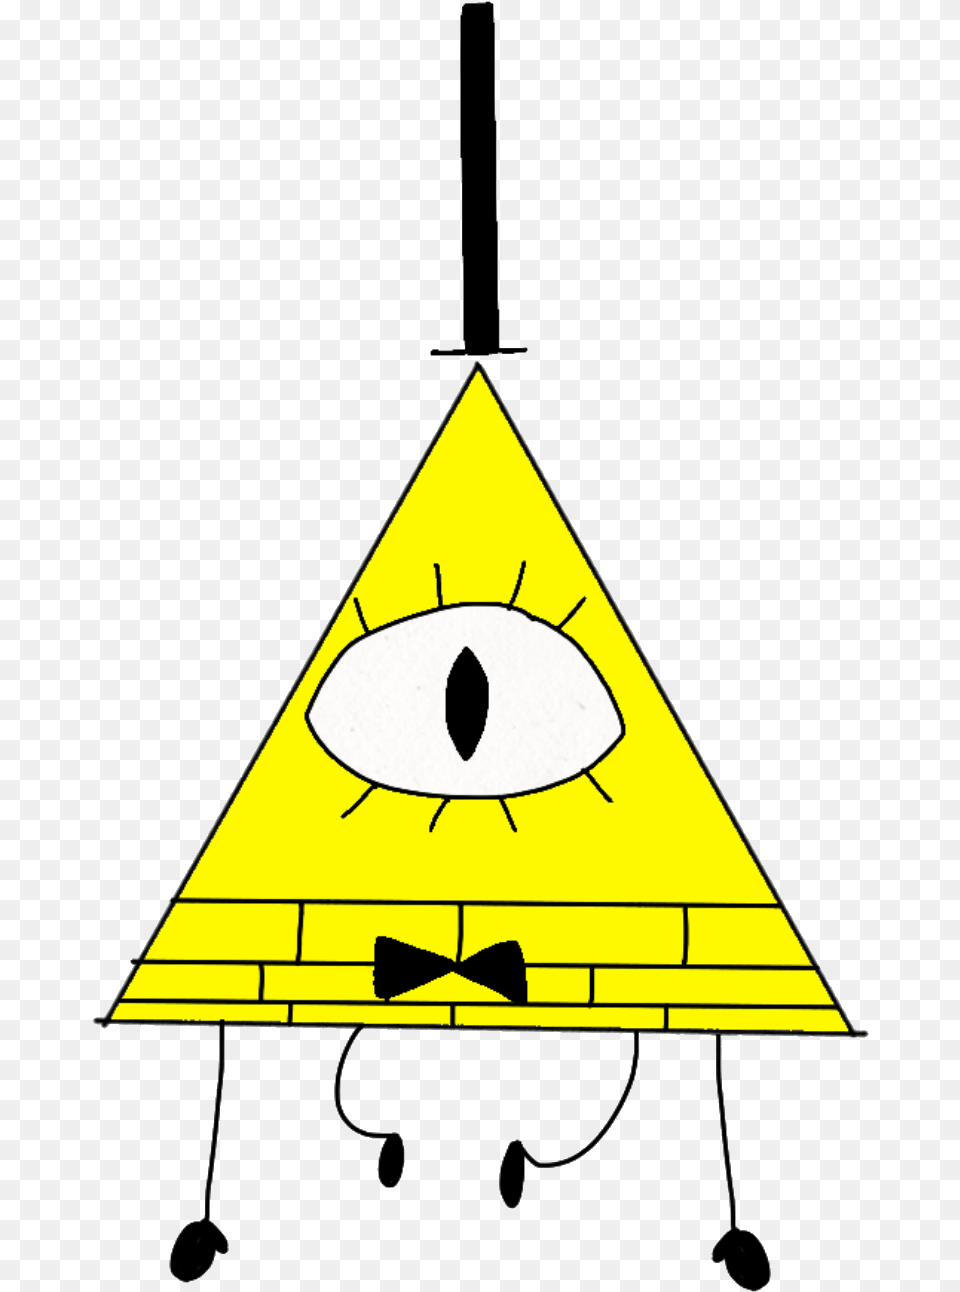 Clip Art, Triangle Png